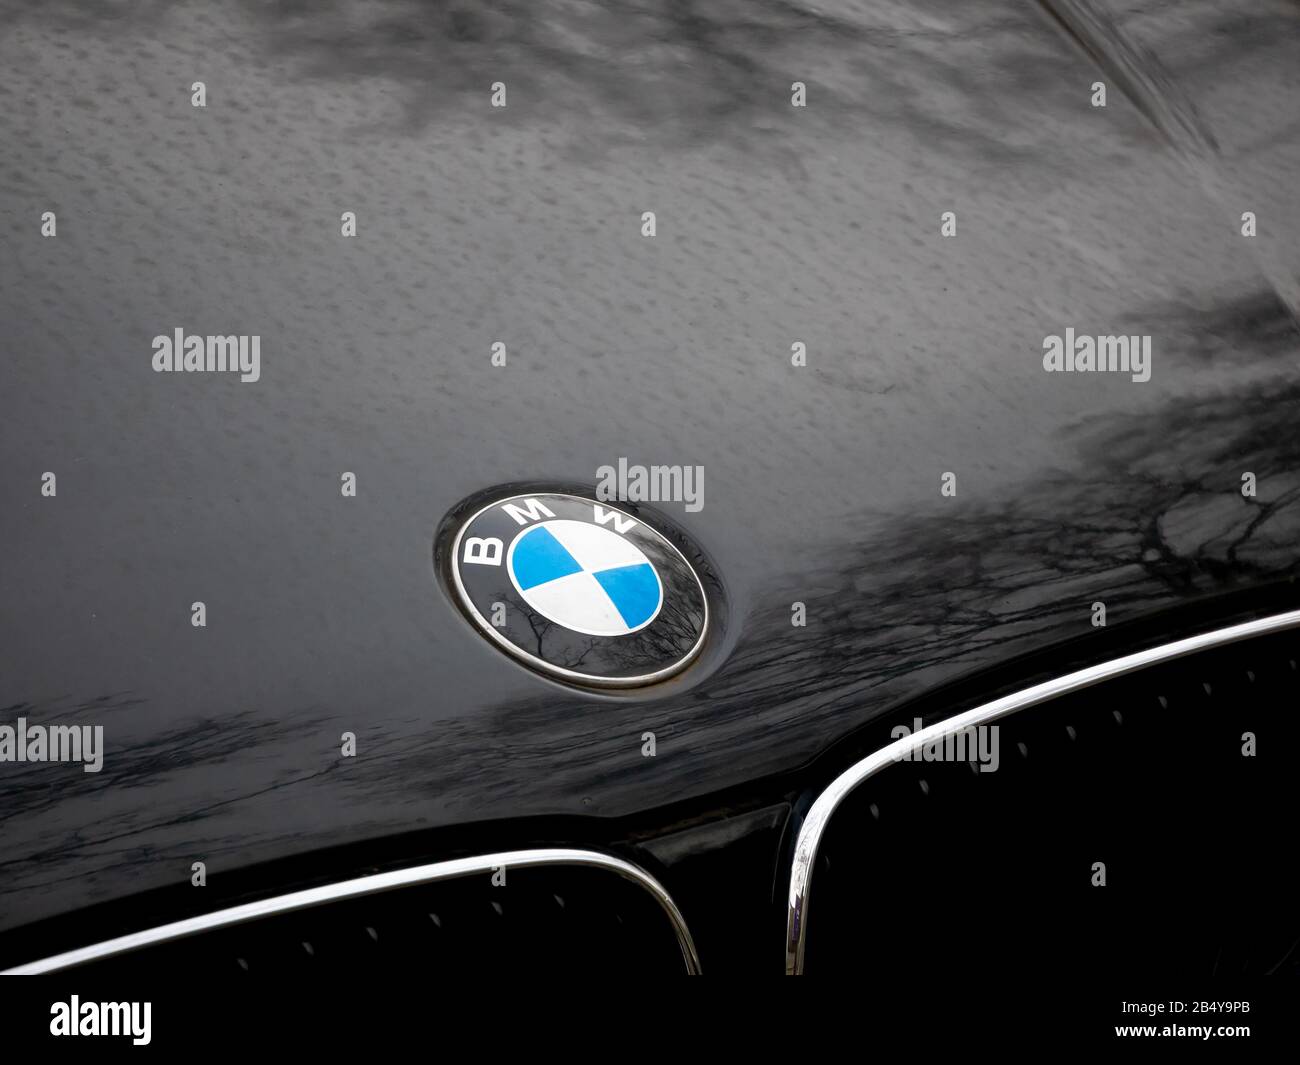 BERLIN, GERMANY - FEBRUARY 12, 2020: BMW Logo On A Black Car With Reflections of Trees Stock Photo